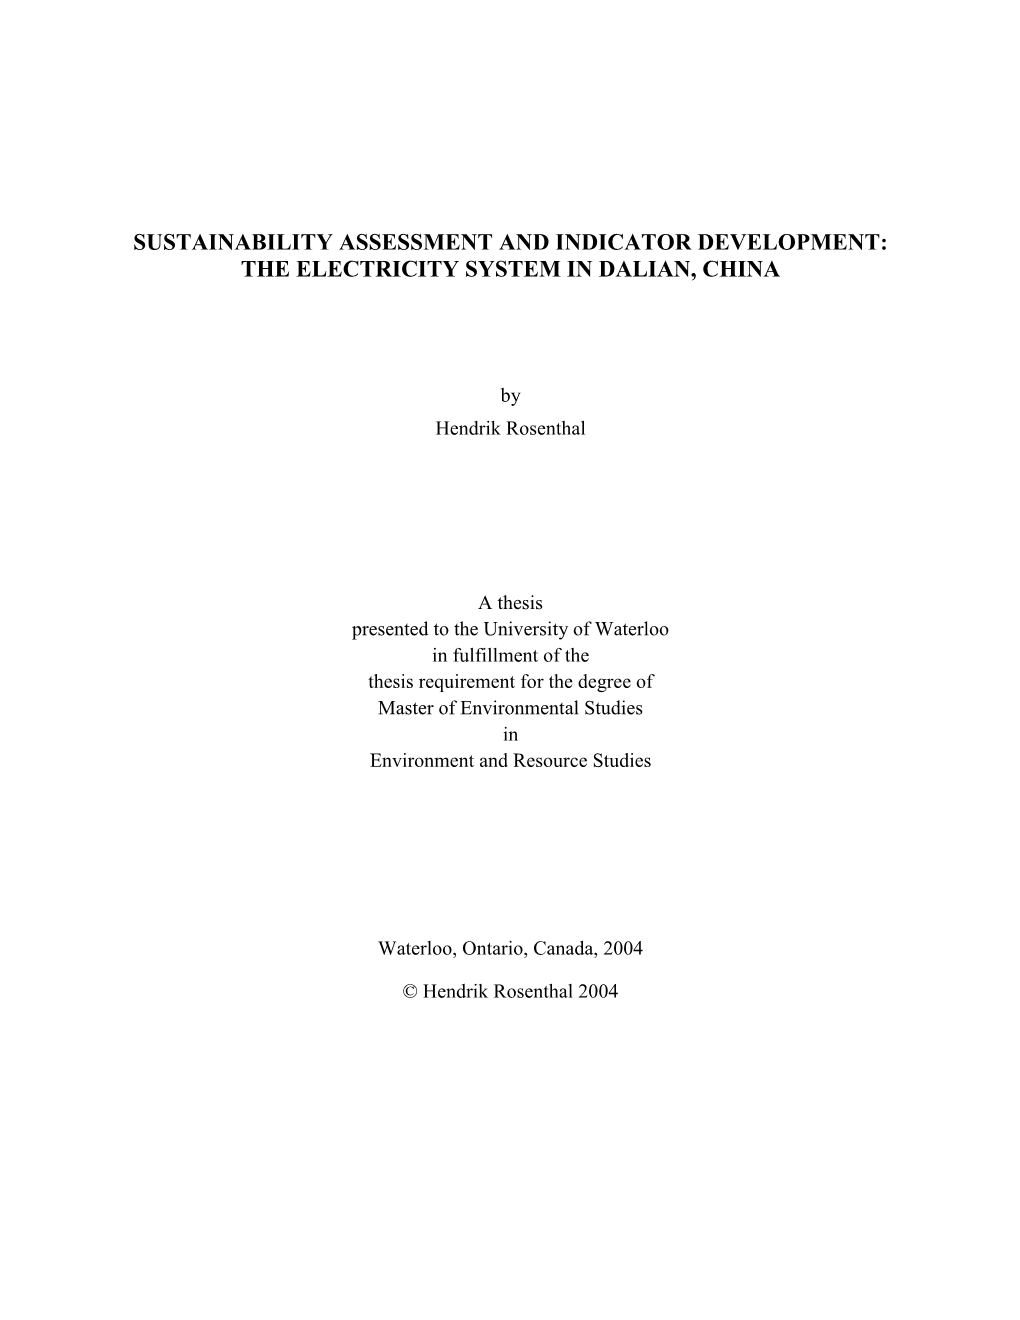 Sustainability Assessment and Indicator Development: the Electricity System in Dalian, China